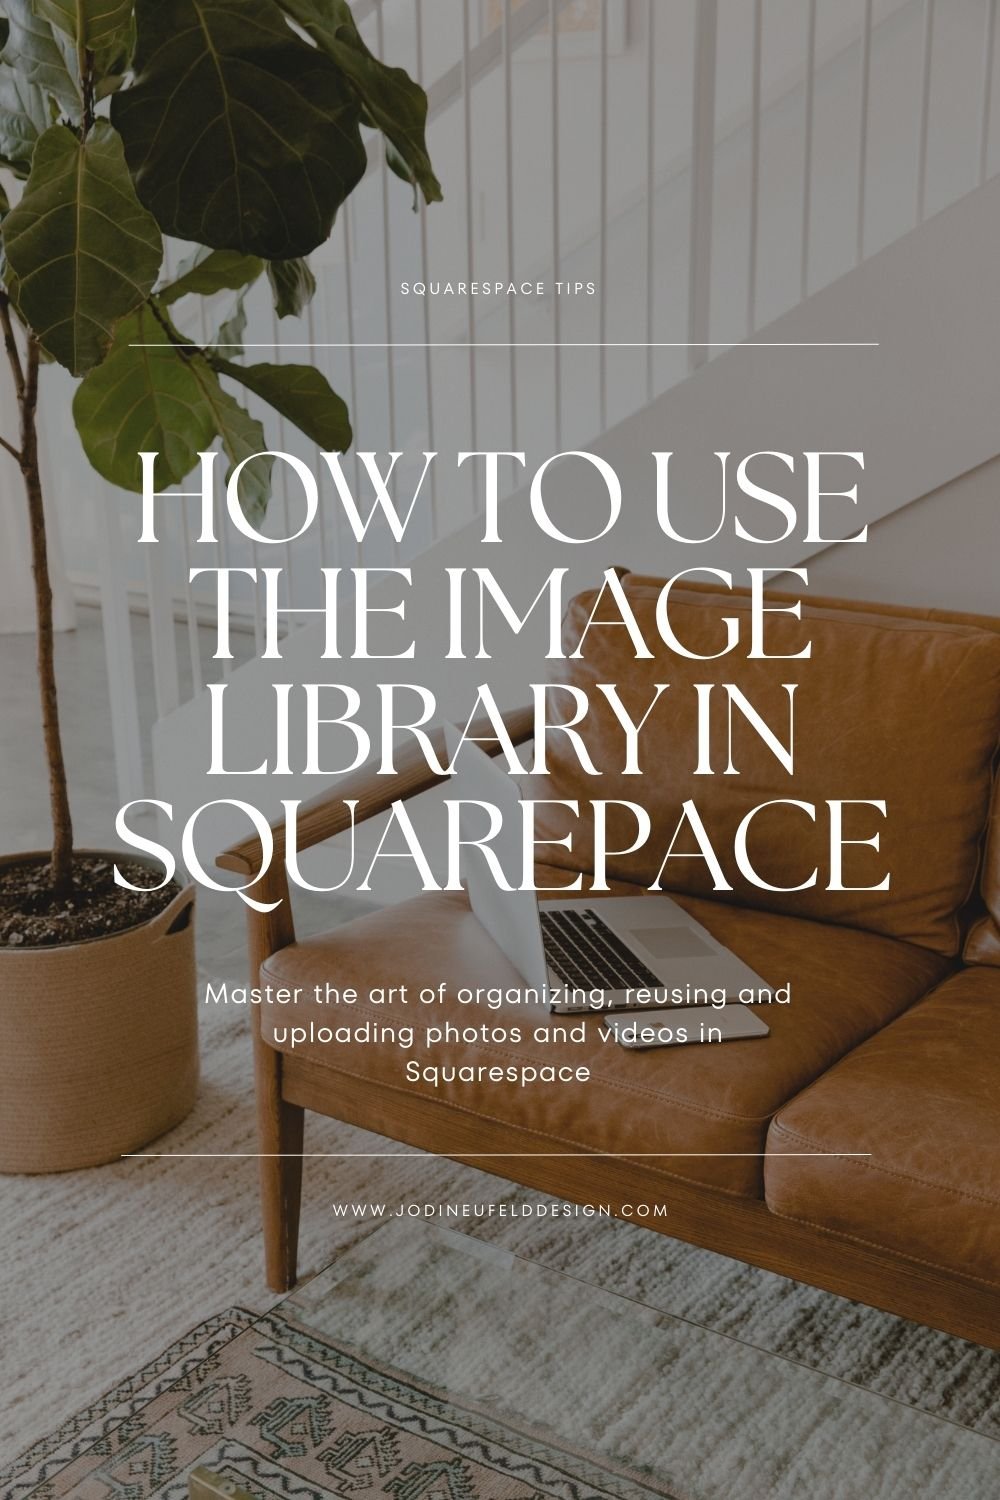 How to use the image asset library in Squarespace | Jodi Neufeld Design Squarespace web designer